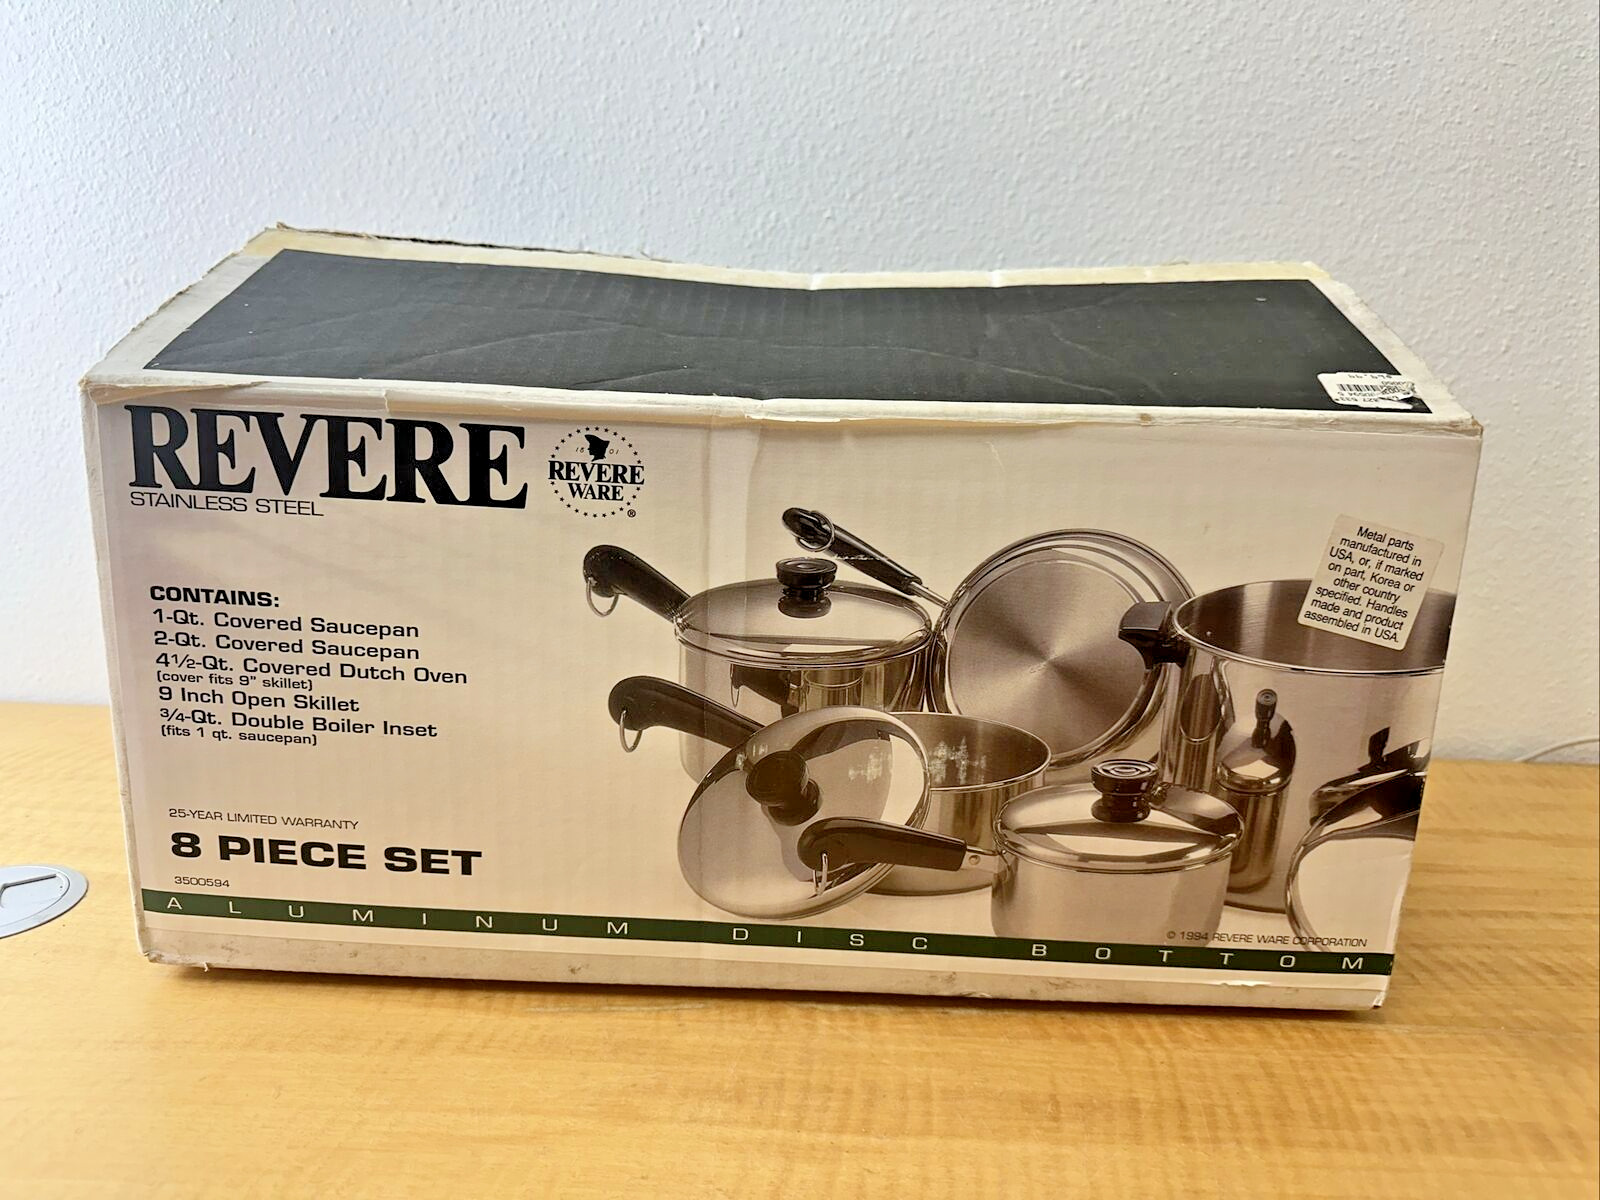 RARE New In Box From 1994-Revere Ware Aluminum Disc Bottom Cookware 8 Piece Set